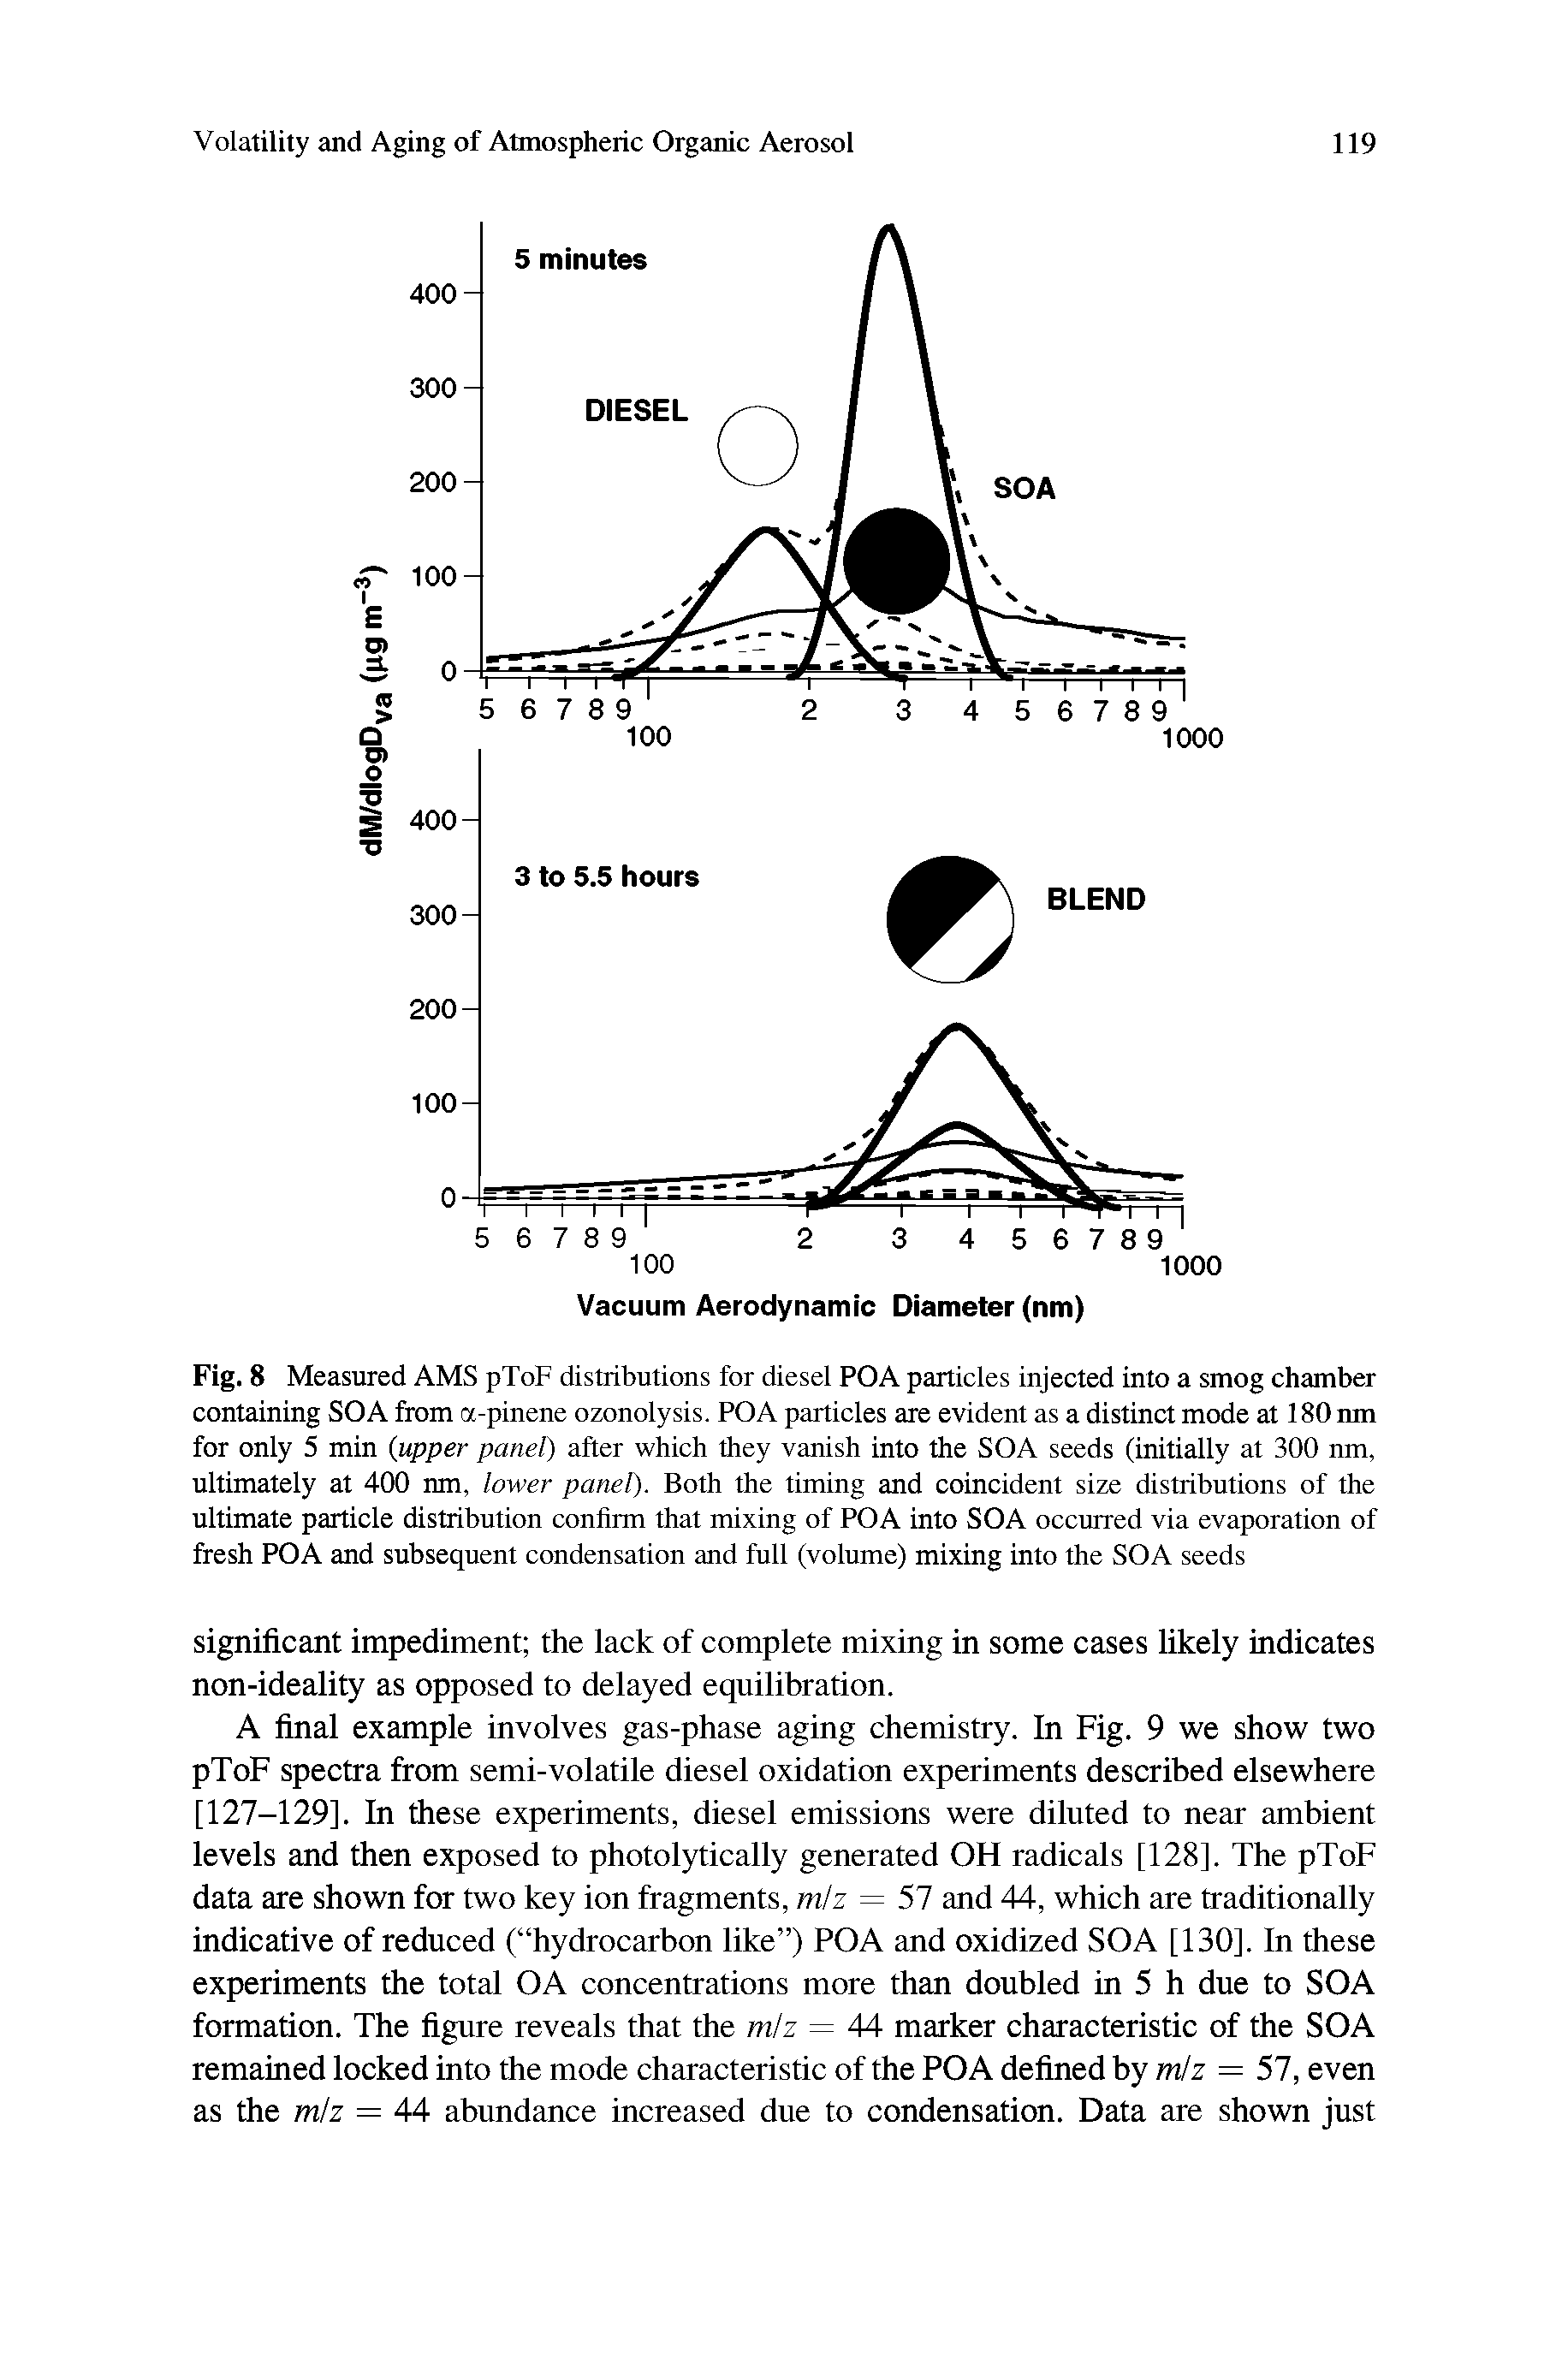 Fig. 8 Measured AMS pToF distributions for diesel POA particles injected into a smog chamber containing SO A from a-pinene ozonolysis. POA particles are evident as a distinct mode at 180 mn for only 5 min (upper panel) after which they vanish into the SOA seeds (initially at 300 nm, ultimately at 400 nm, lower panel). Both the timing and coincident size distributions of the ultimate particle distribution confirm that mixing of POA into SOA occurred via evaporation of fresh POA and subsequent condensation and full (volume) mixing into the SOA seeds...